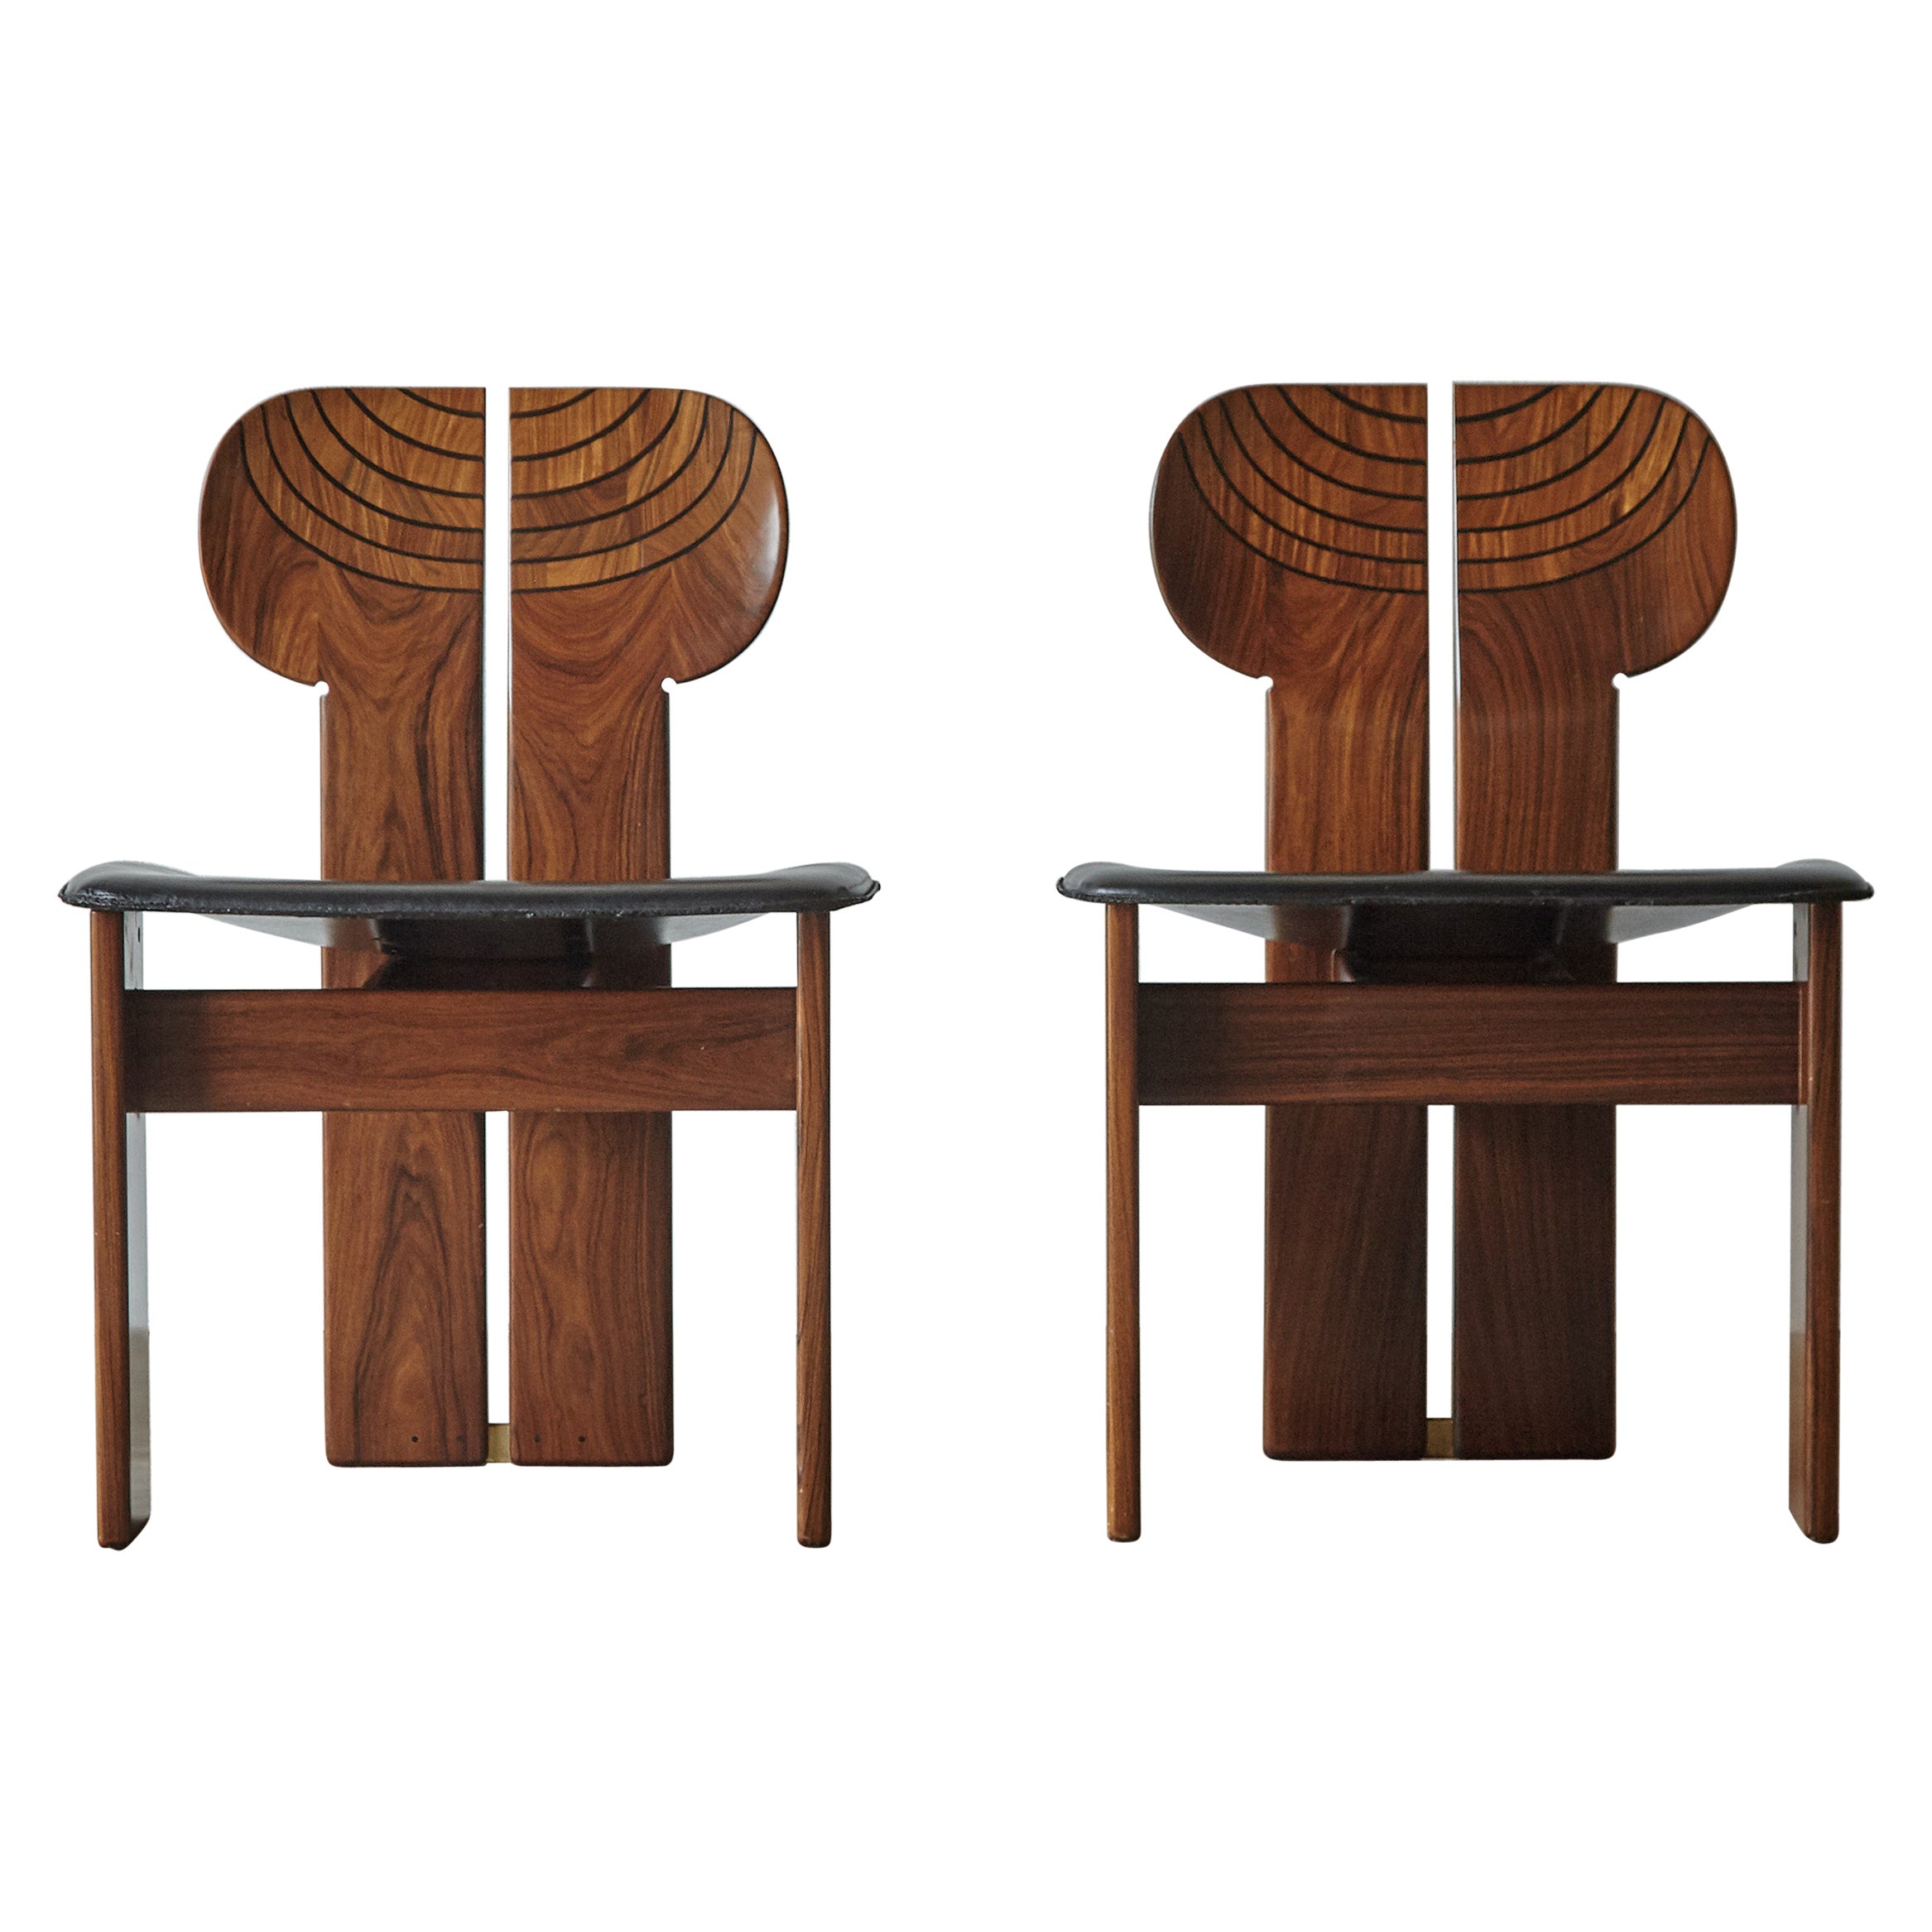 Africa Chairs by Afra & Tobia Scarpa, Maxalto, Italy, 1970s-1980s